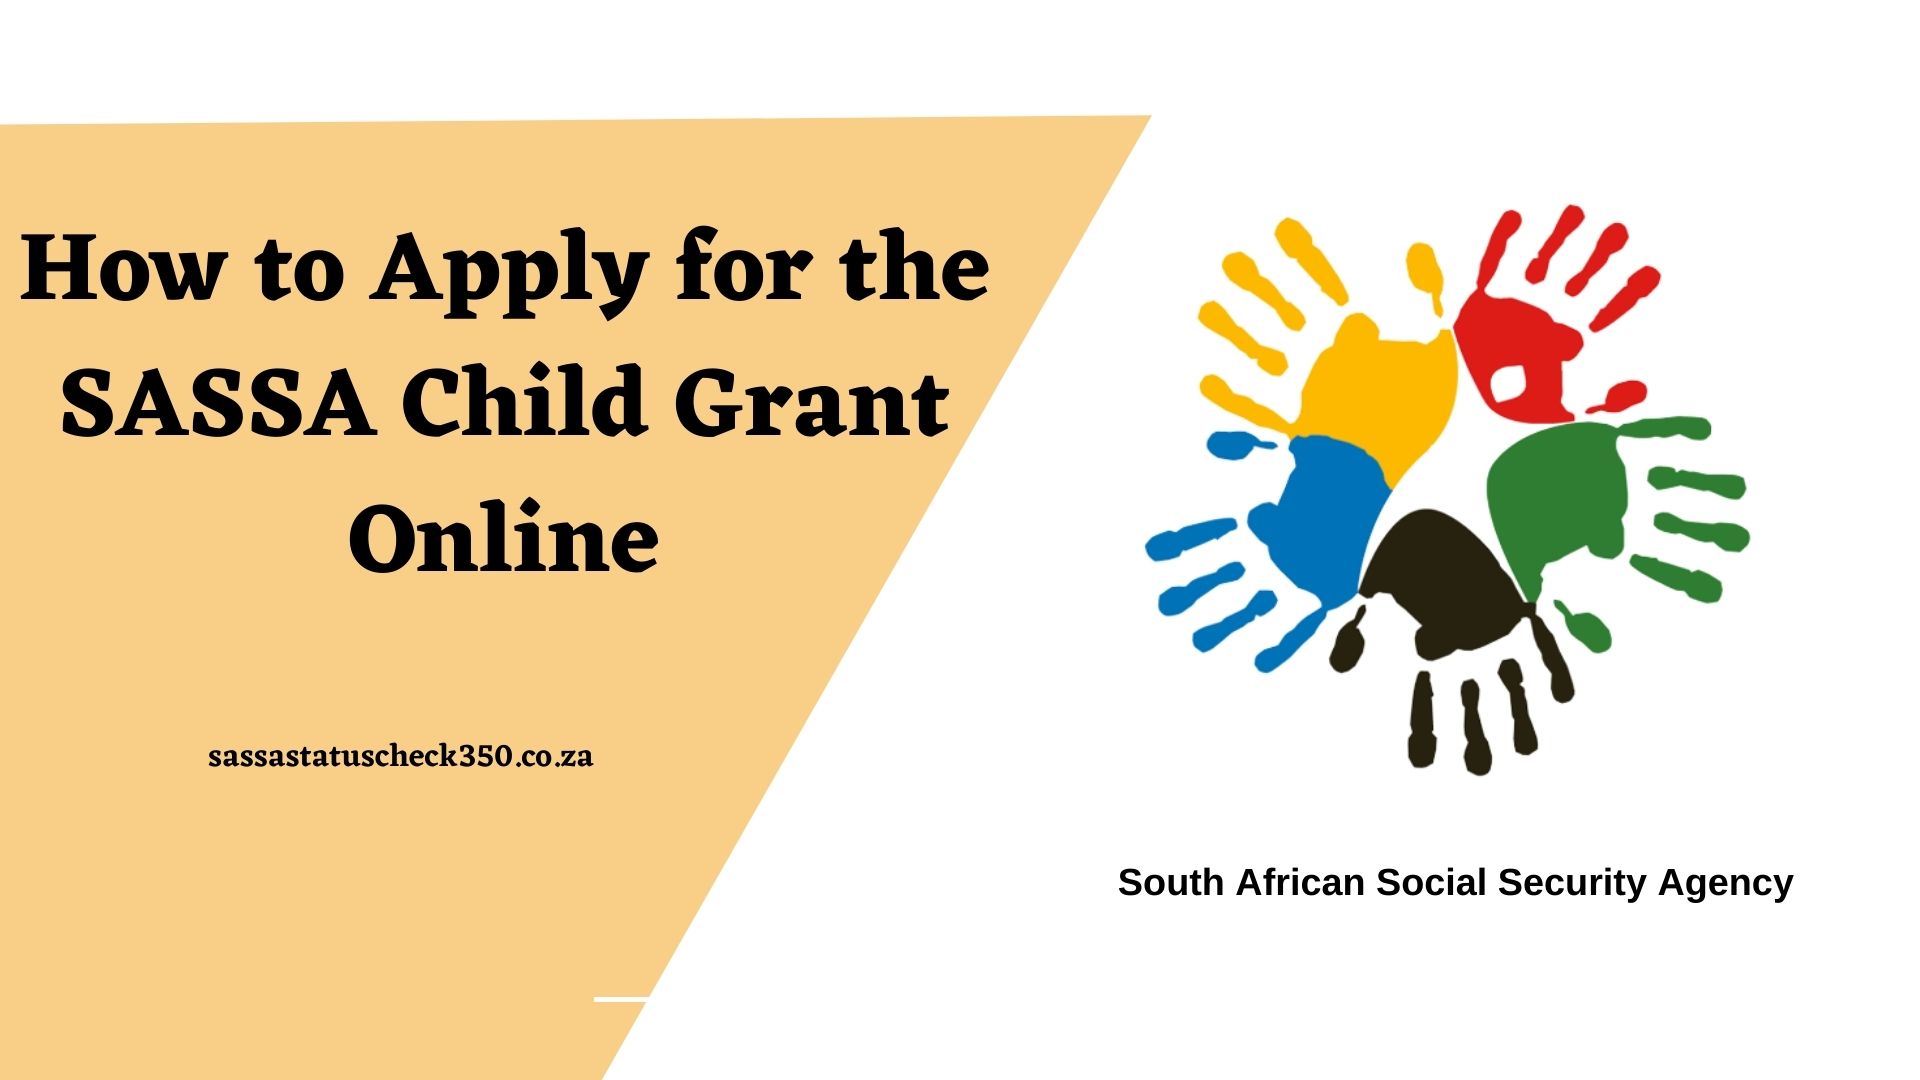 How to Apply for the SASSA Child Grant Online